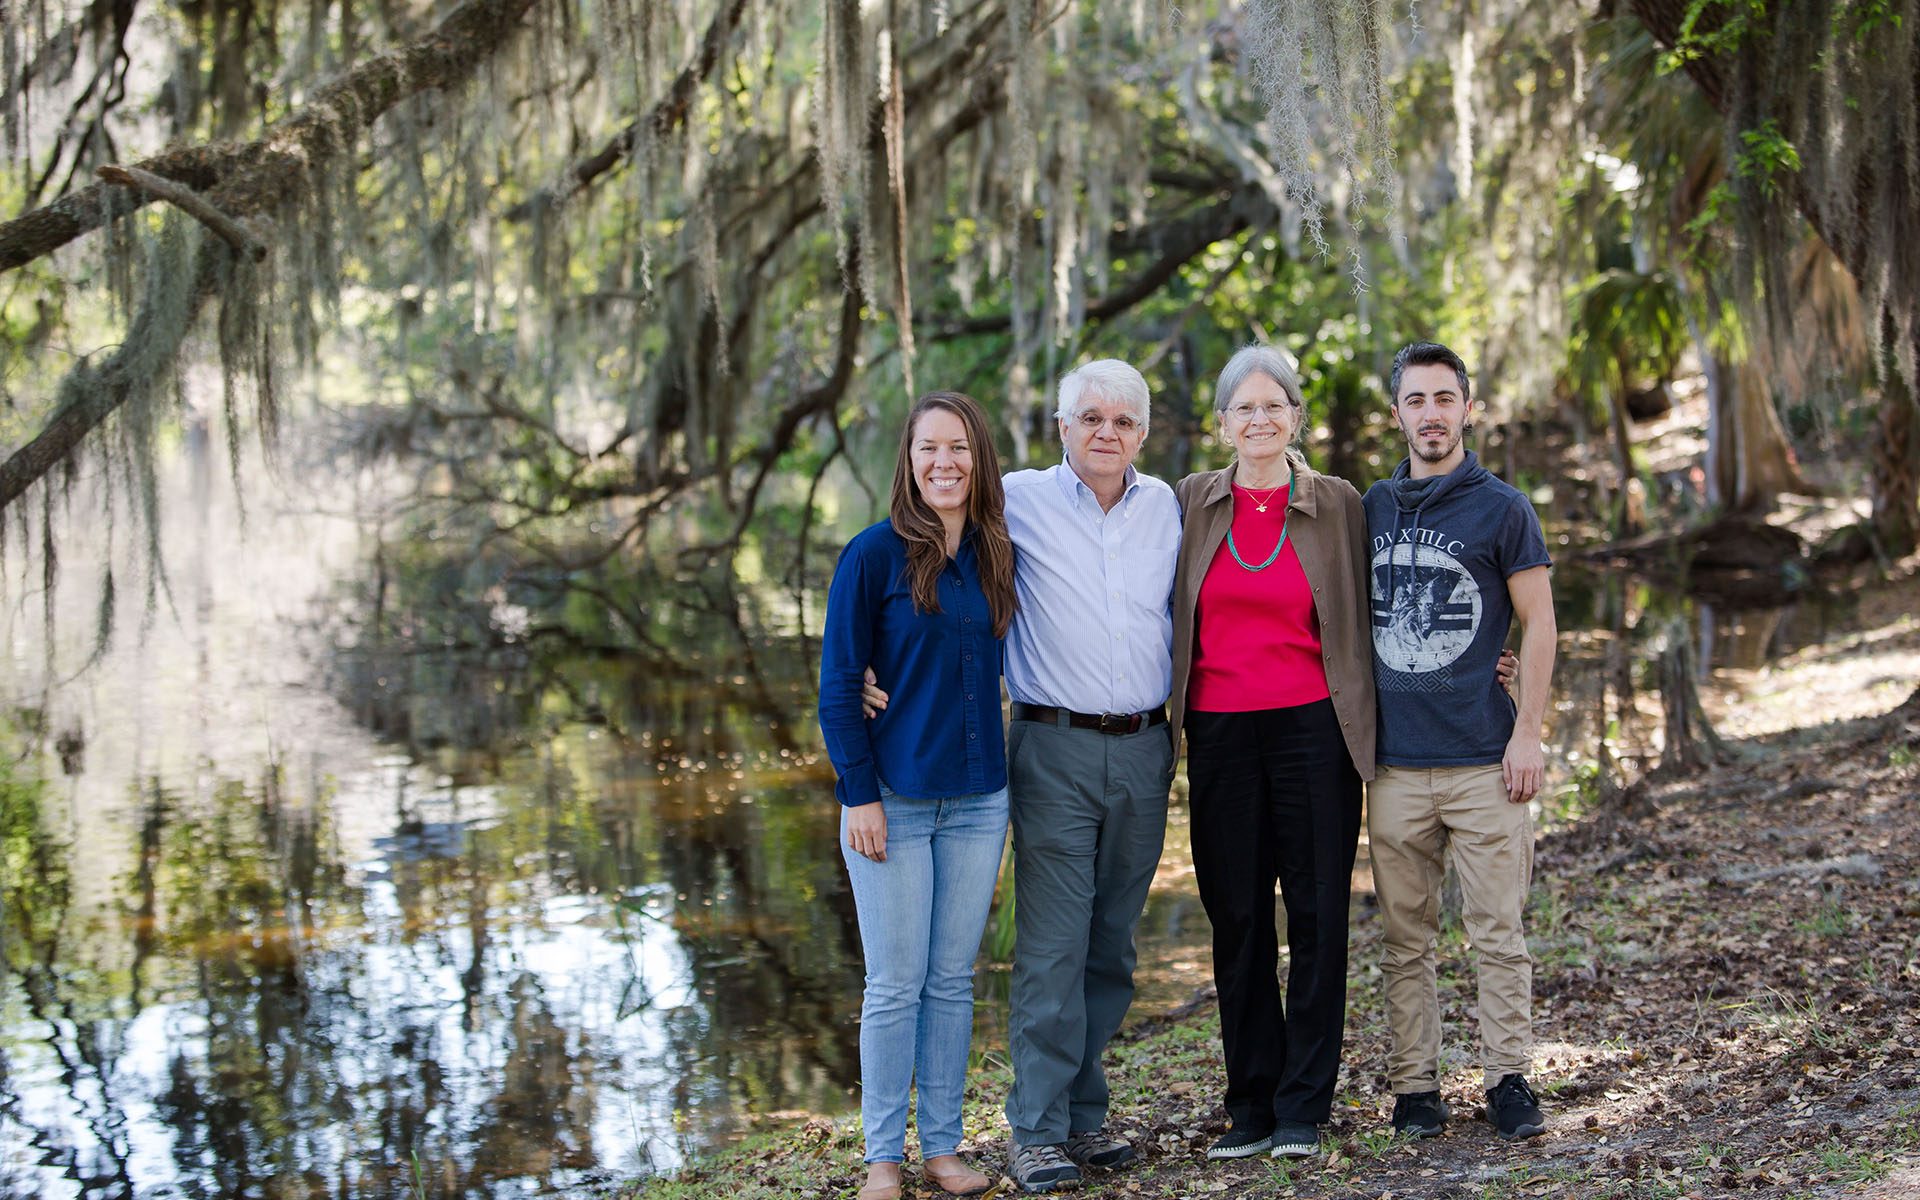 group of four people standing under Spanish moss-drenched trees by idyllic lake